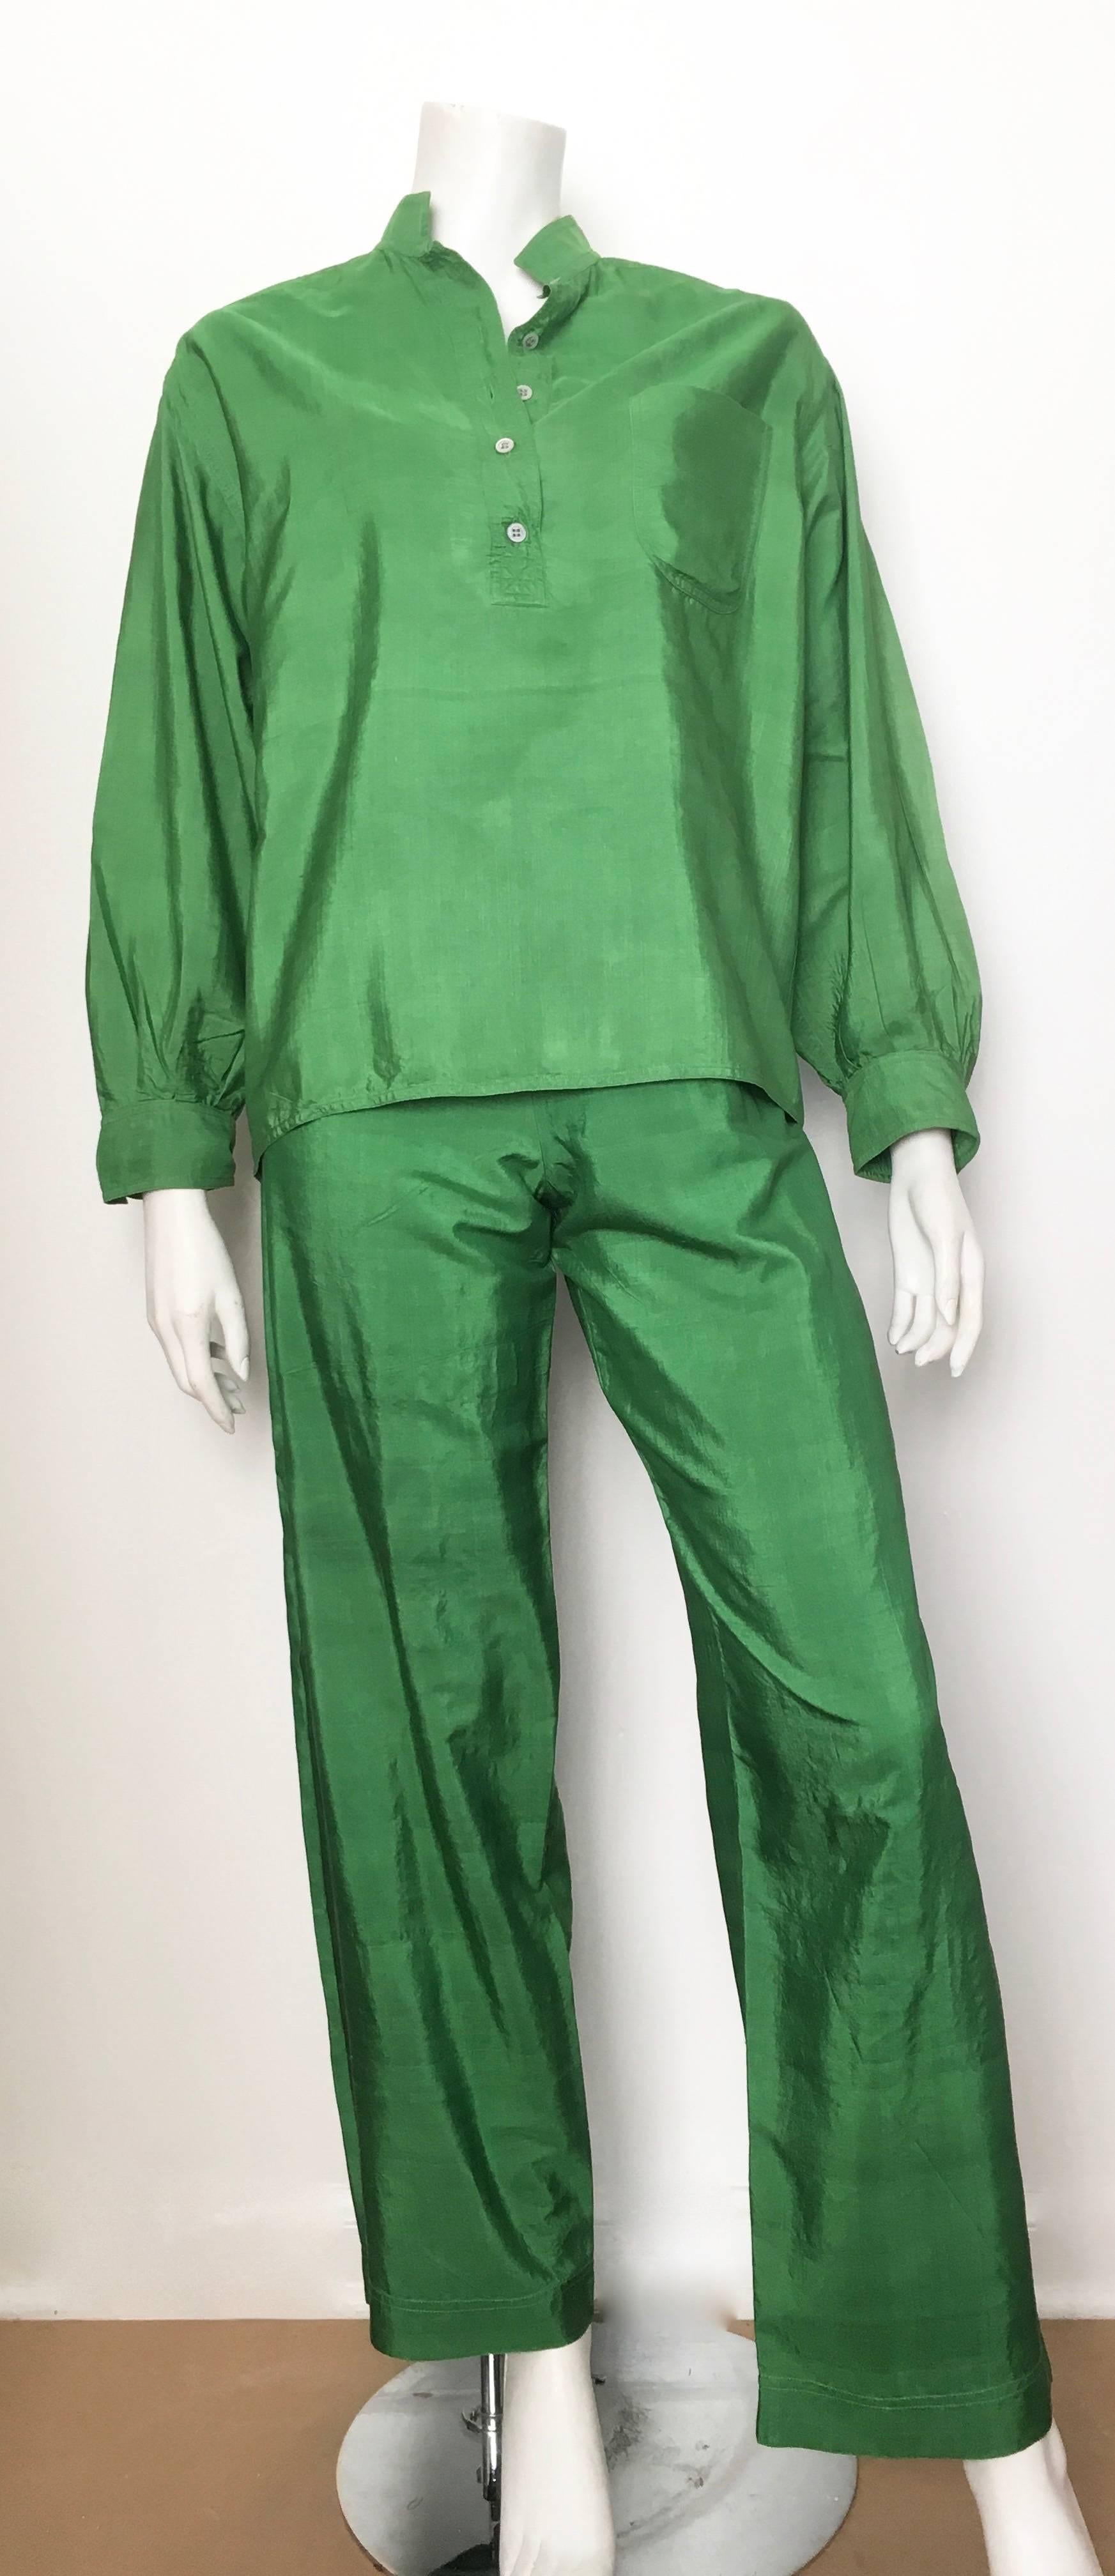 Saint Laurent Rive Gauche 1978-1979 green flowing blouse, pants and 2 sashes ( orange & pink).  The flowing blouse is a French size 40 and fits an USA size 8 and the pants with elastic waistband is a French size 36 and will fit an USA size 4. There